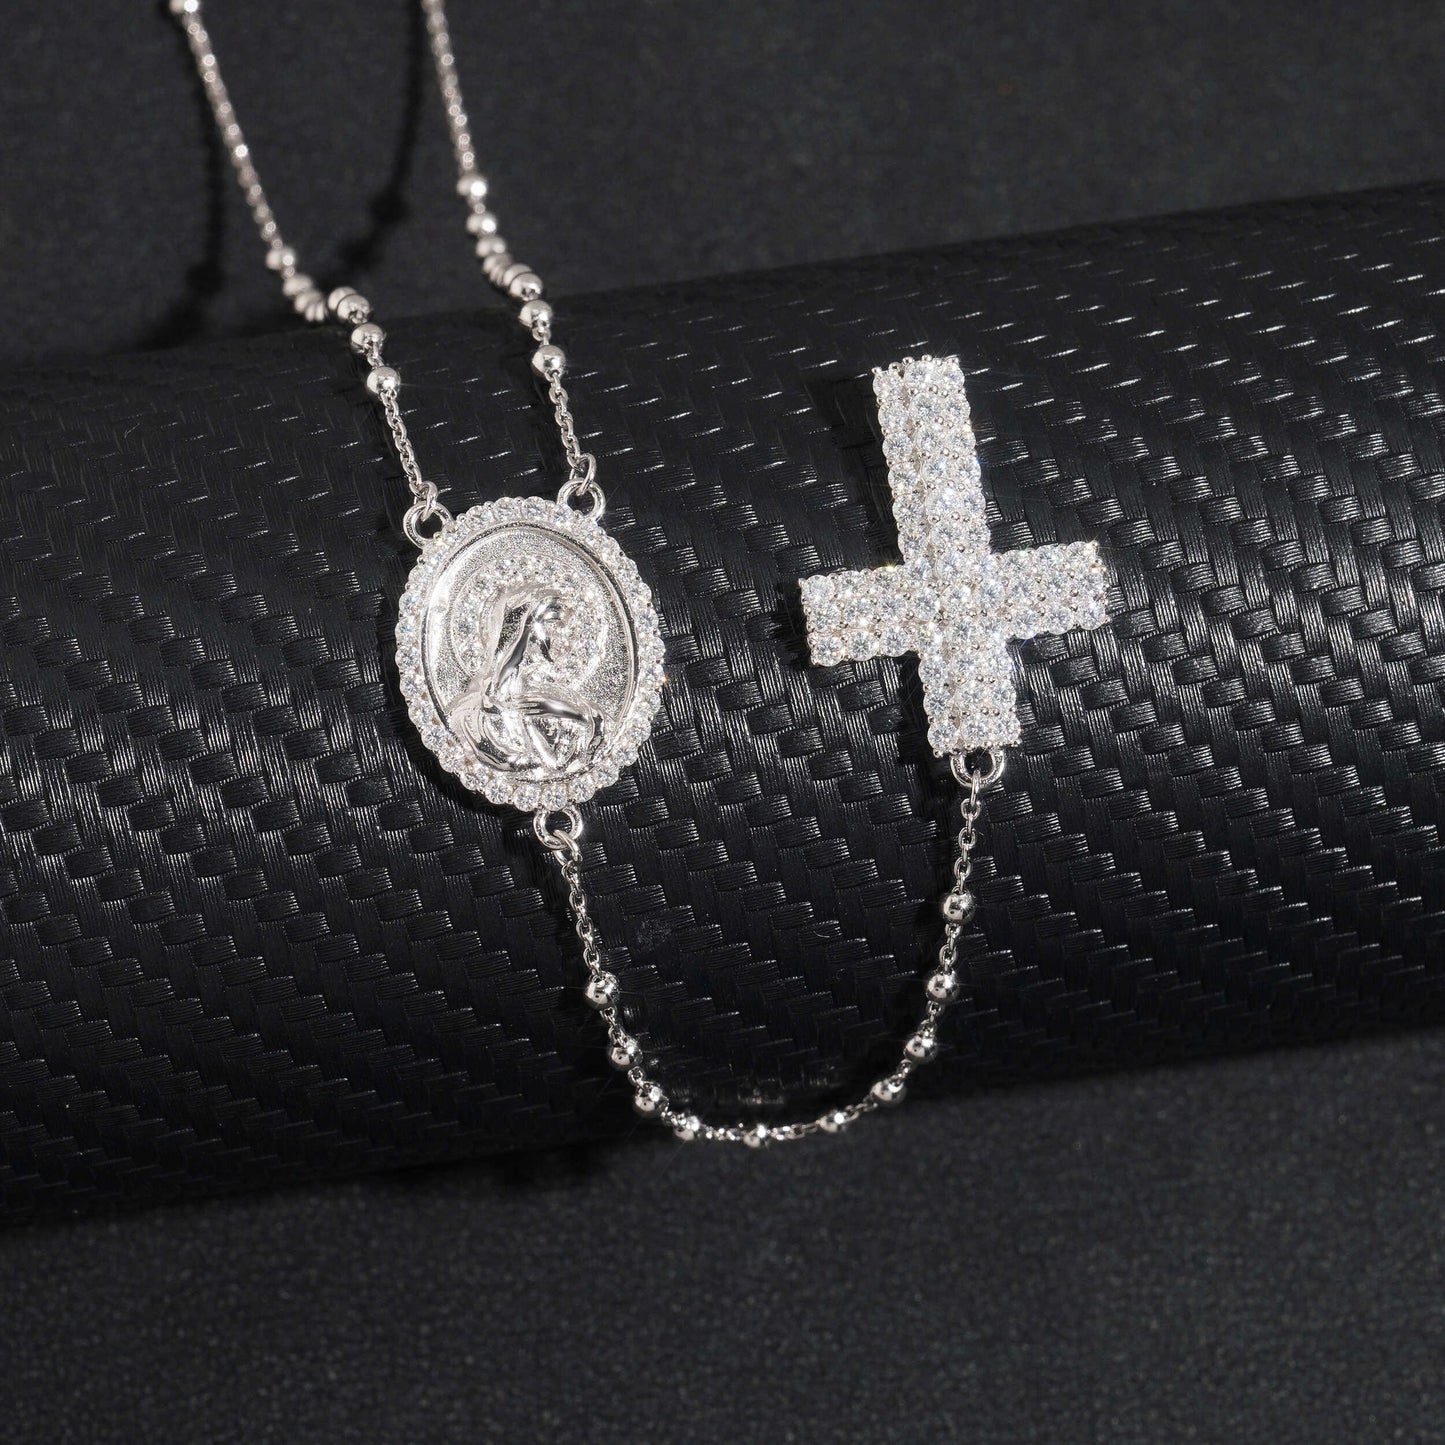 Custom made hip hop jewelry featuring a rosary cross necklace with Jesus, moissanite diamond, sterling silver 9252